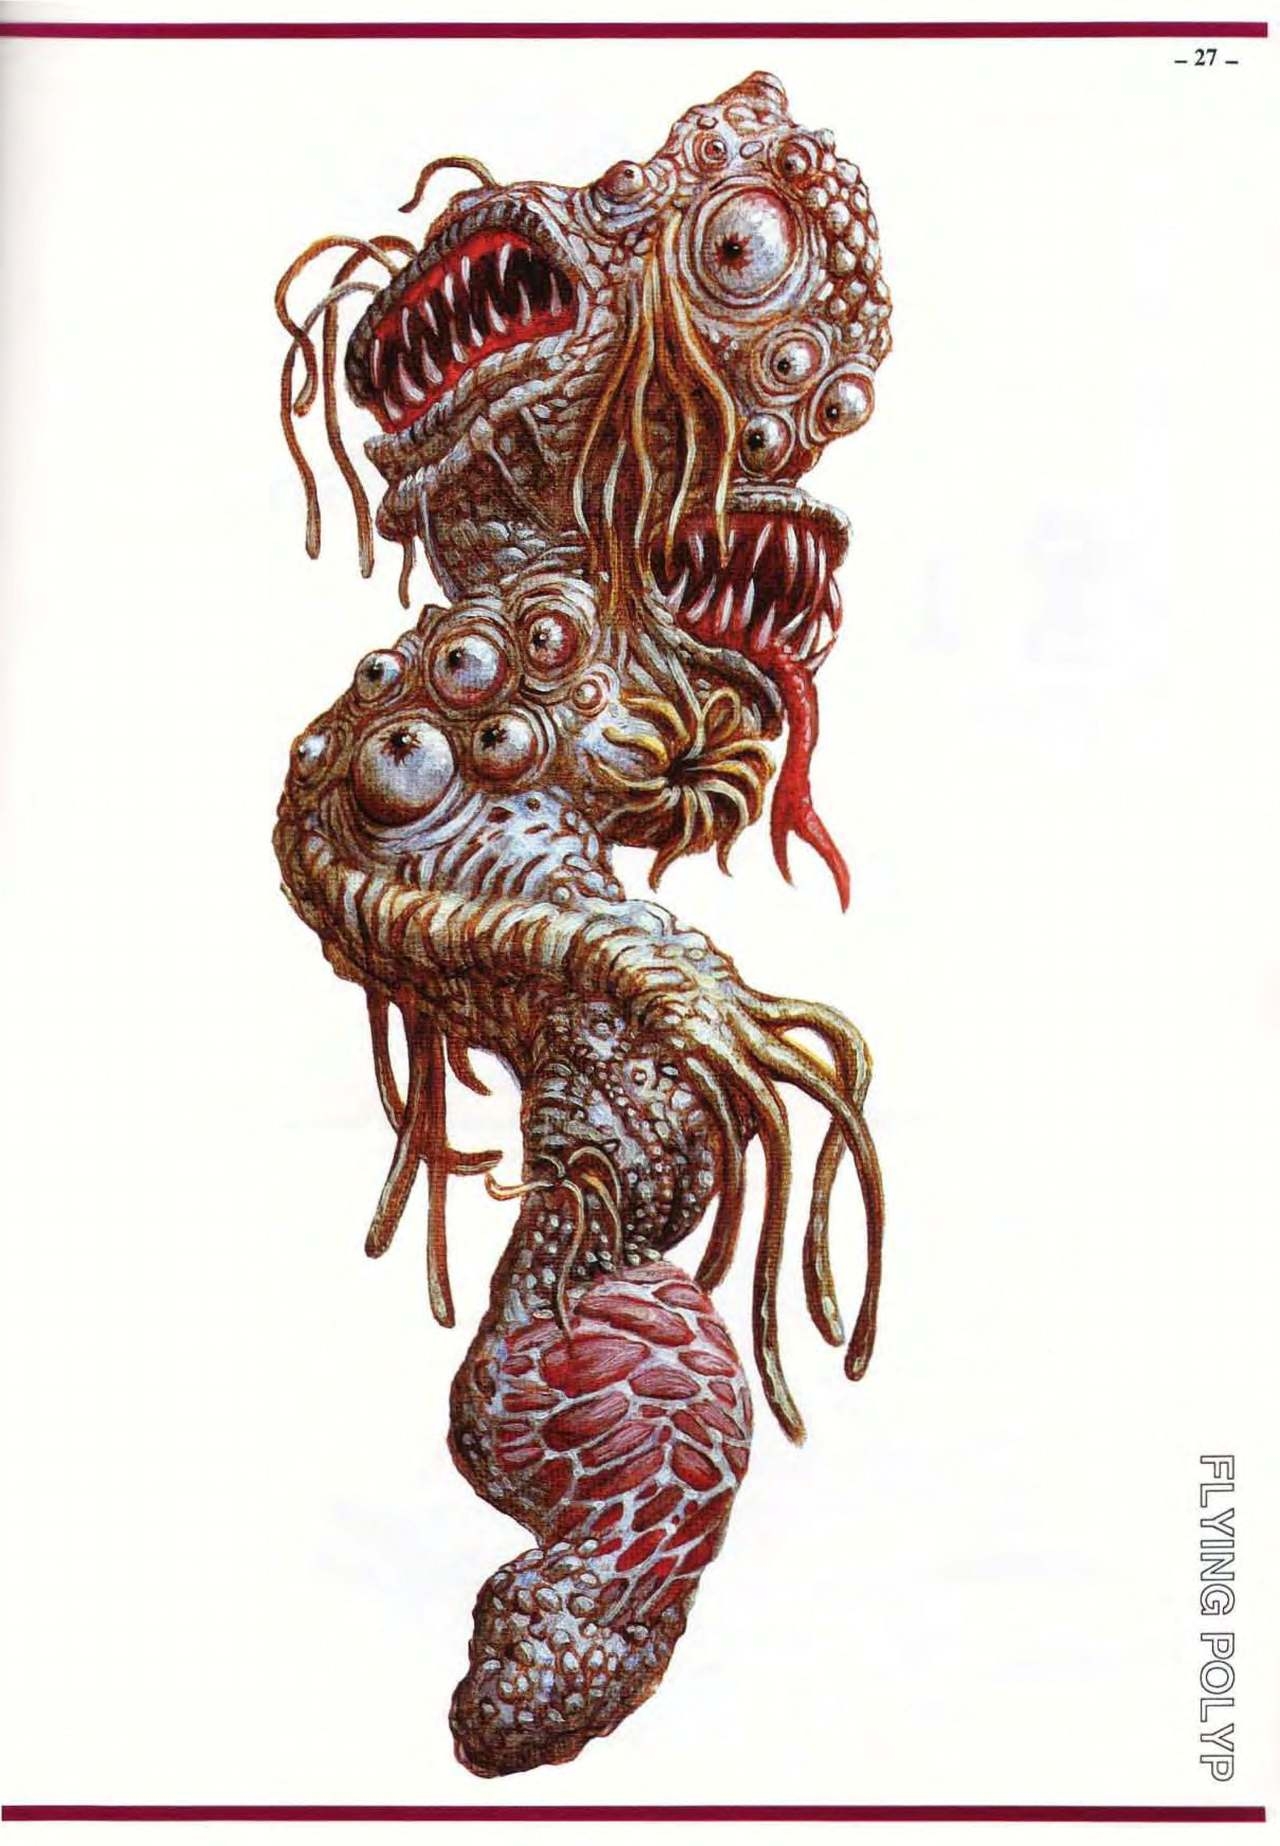 S. Petersen's Field Guide to Cthulhu Monsters 26